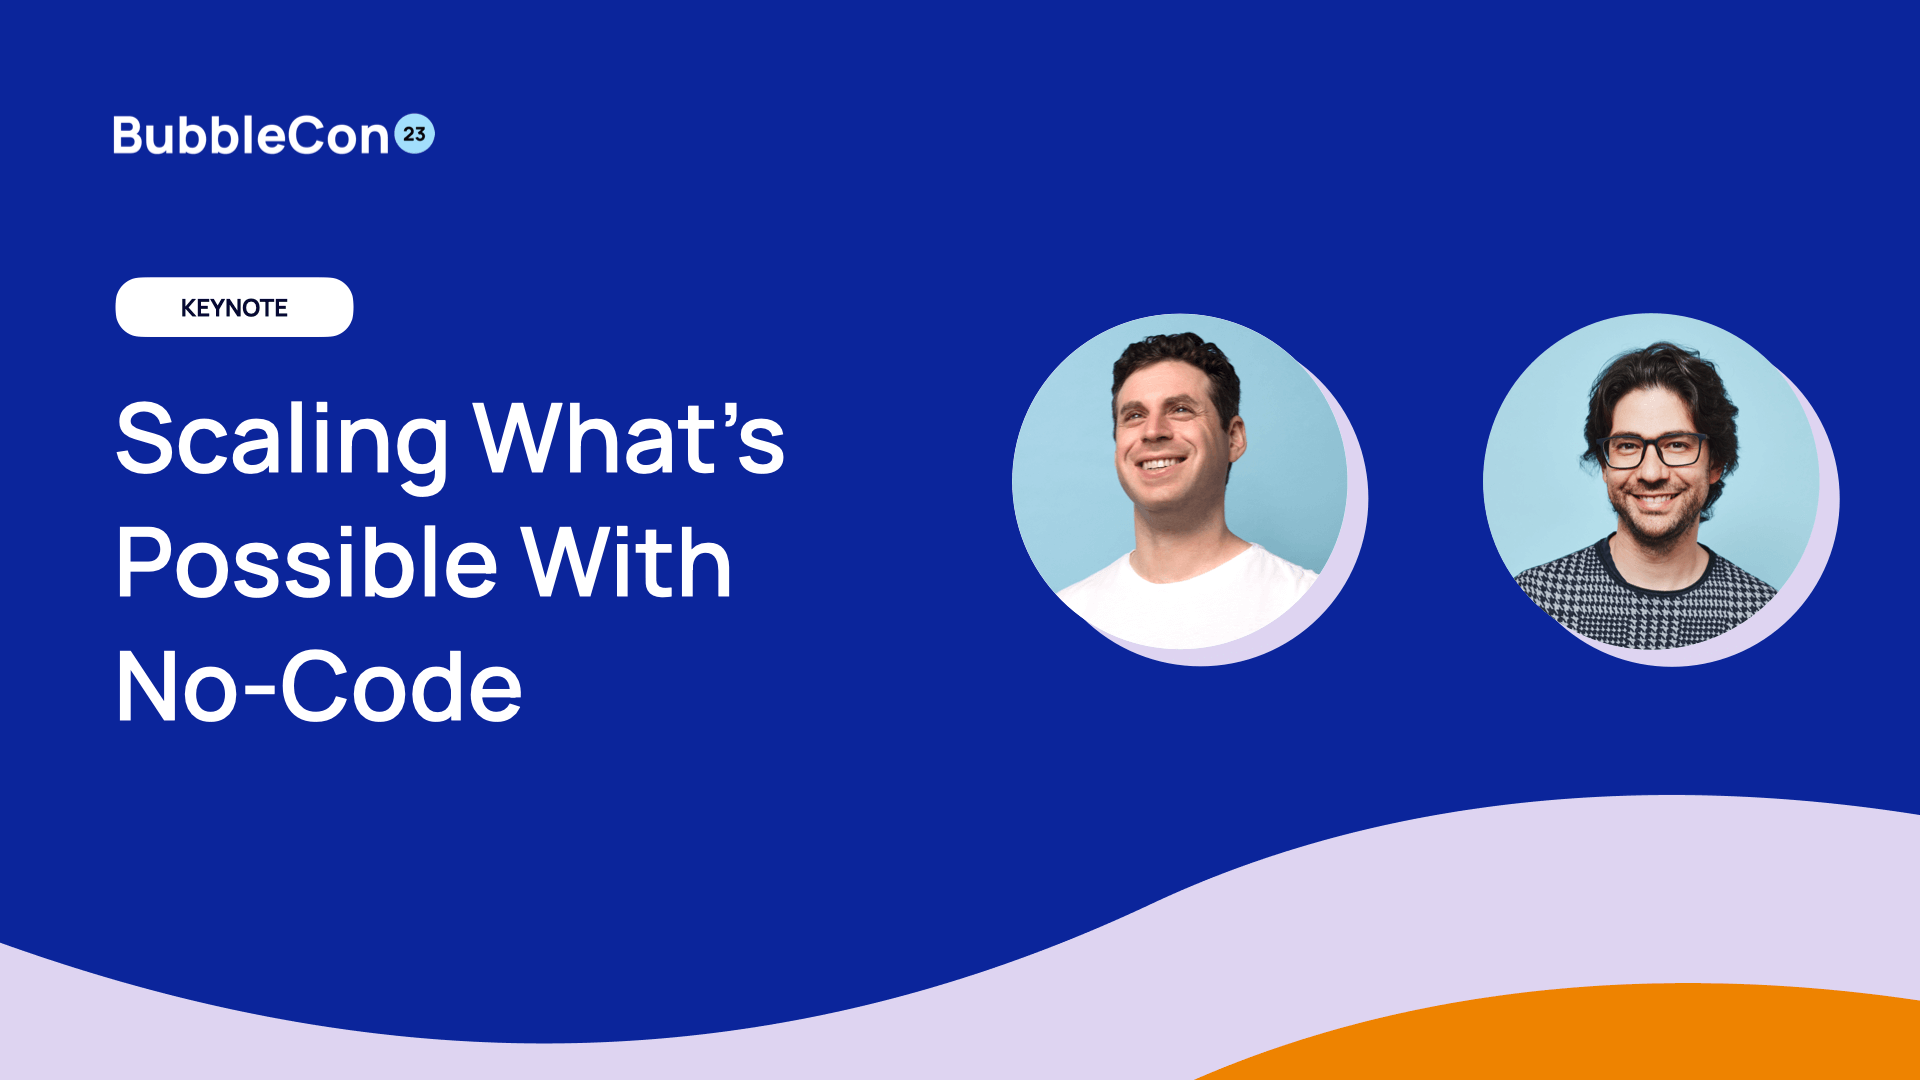 Founder Keynote: Scaling What’s Possible With No-Code